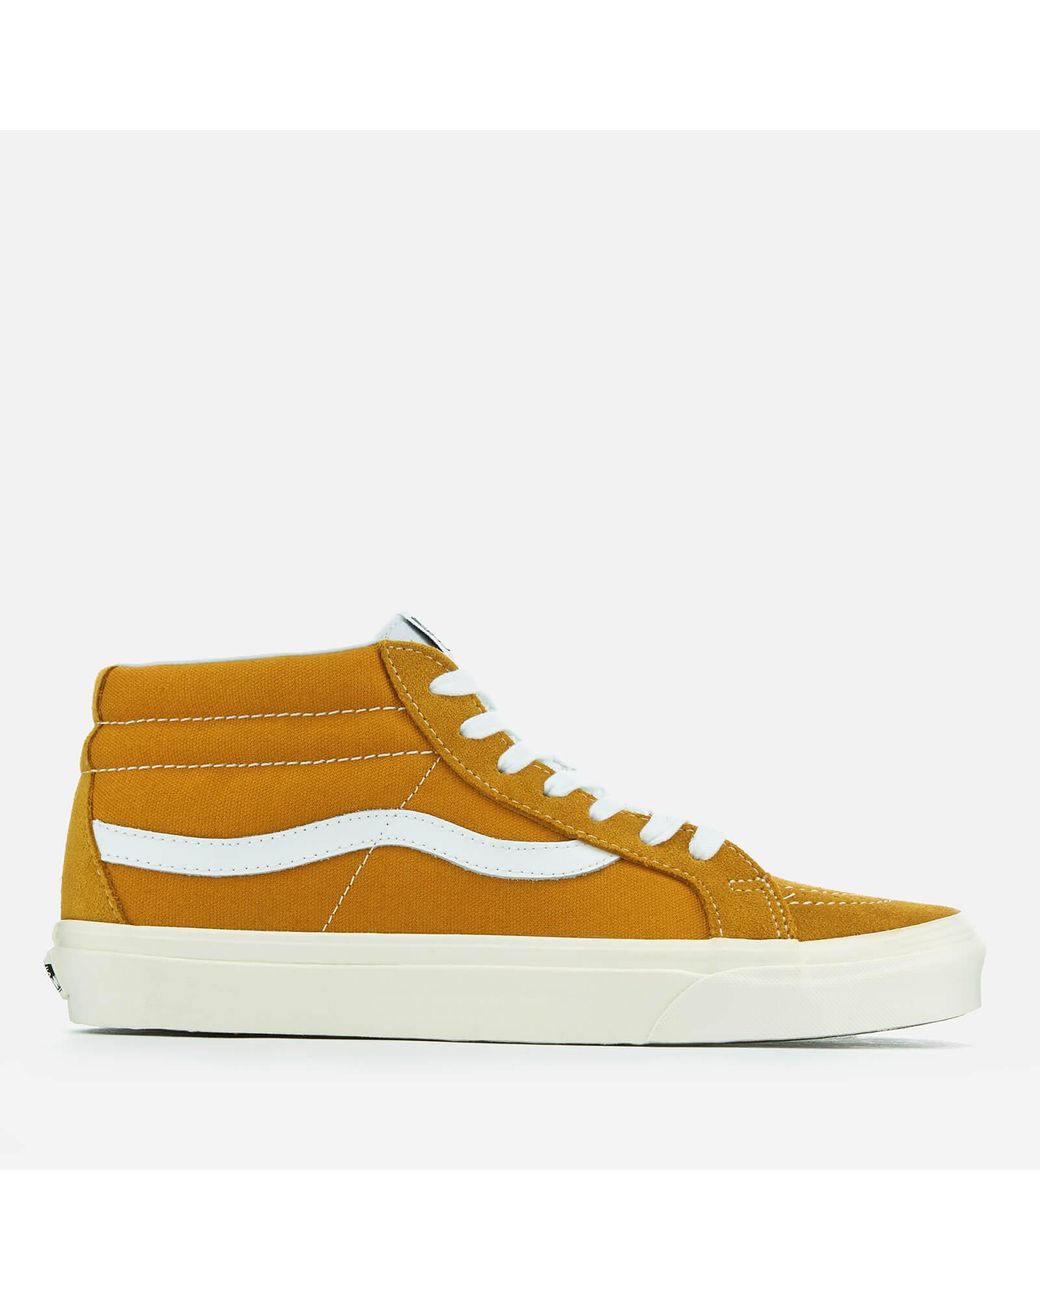 Vans Sk8-mid Reissue Retro Sport Trainers in Yellow | Lyst